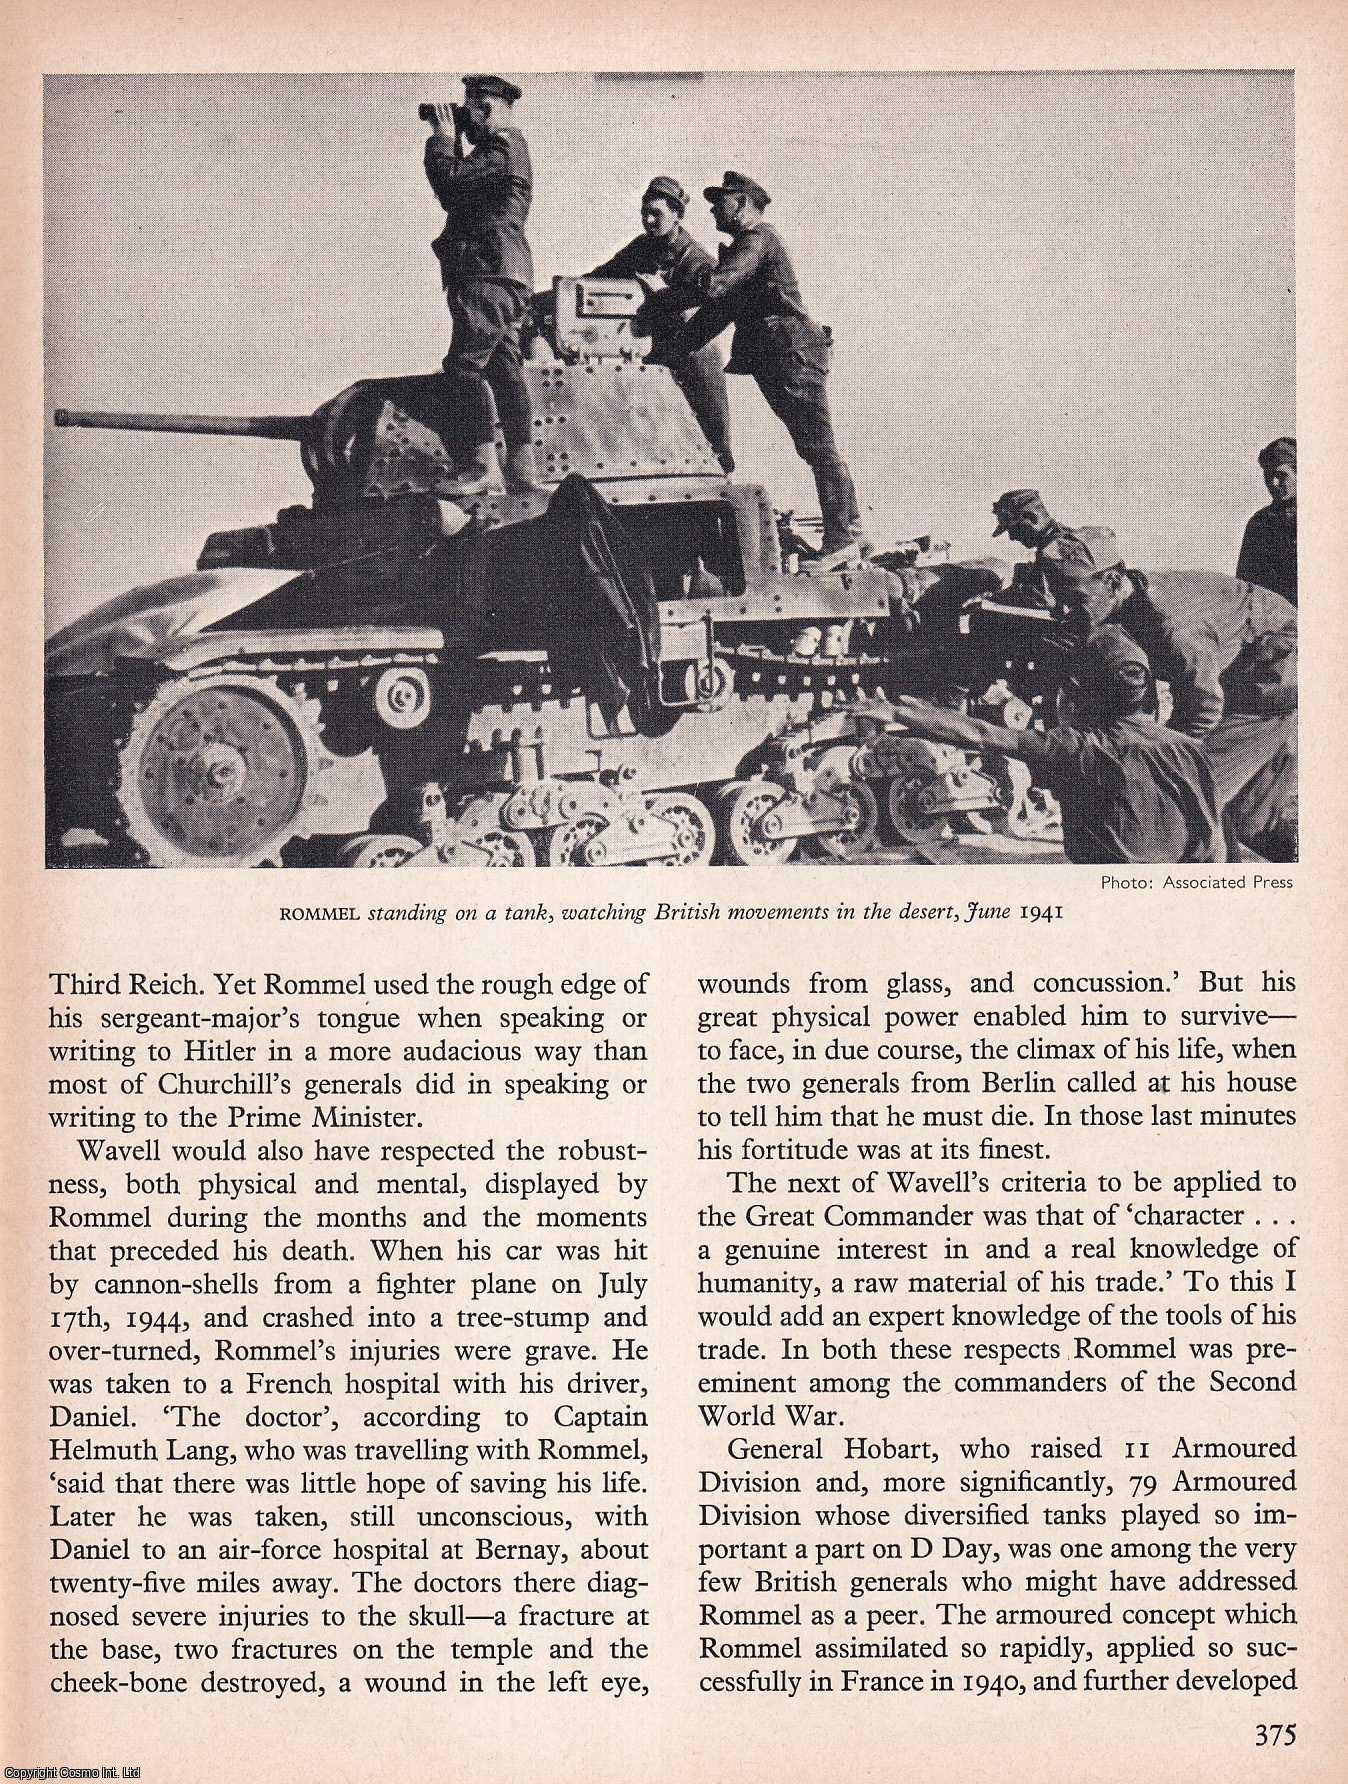 Ronald Lewin - Rommel and Generalship: A Study of The German Commander as One of The Great Captains of War. An original article from History Today magazine, 1968.